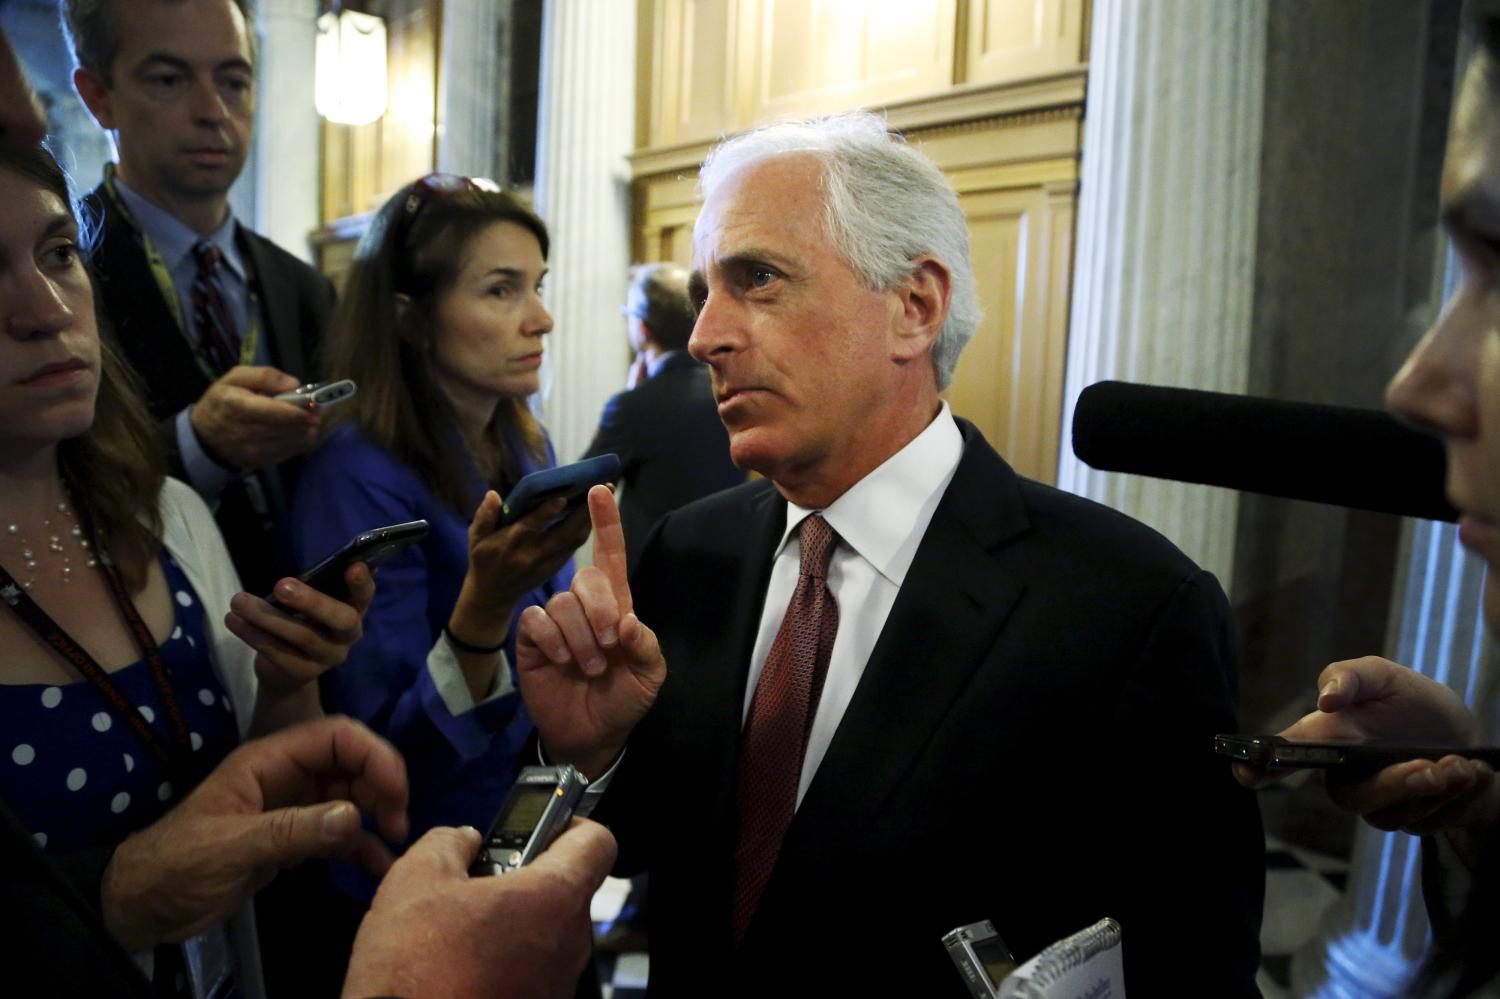 U.S. Senator Bob Corker (R-TN) talks to reporters after the weekly Republican caucus policy luncheon at the U.S. Capitol in Washington May 12, 2015. REUTERS/Jonathan Ernst